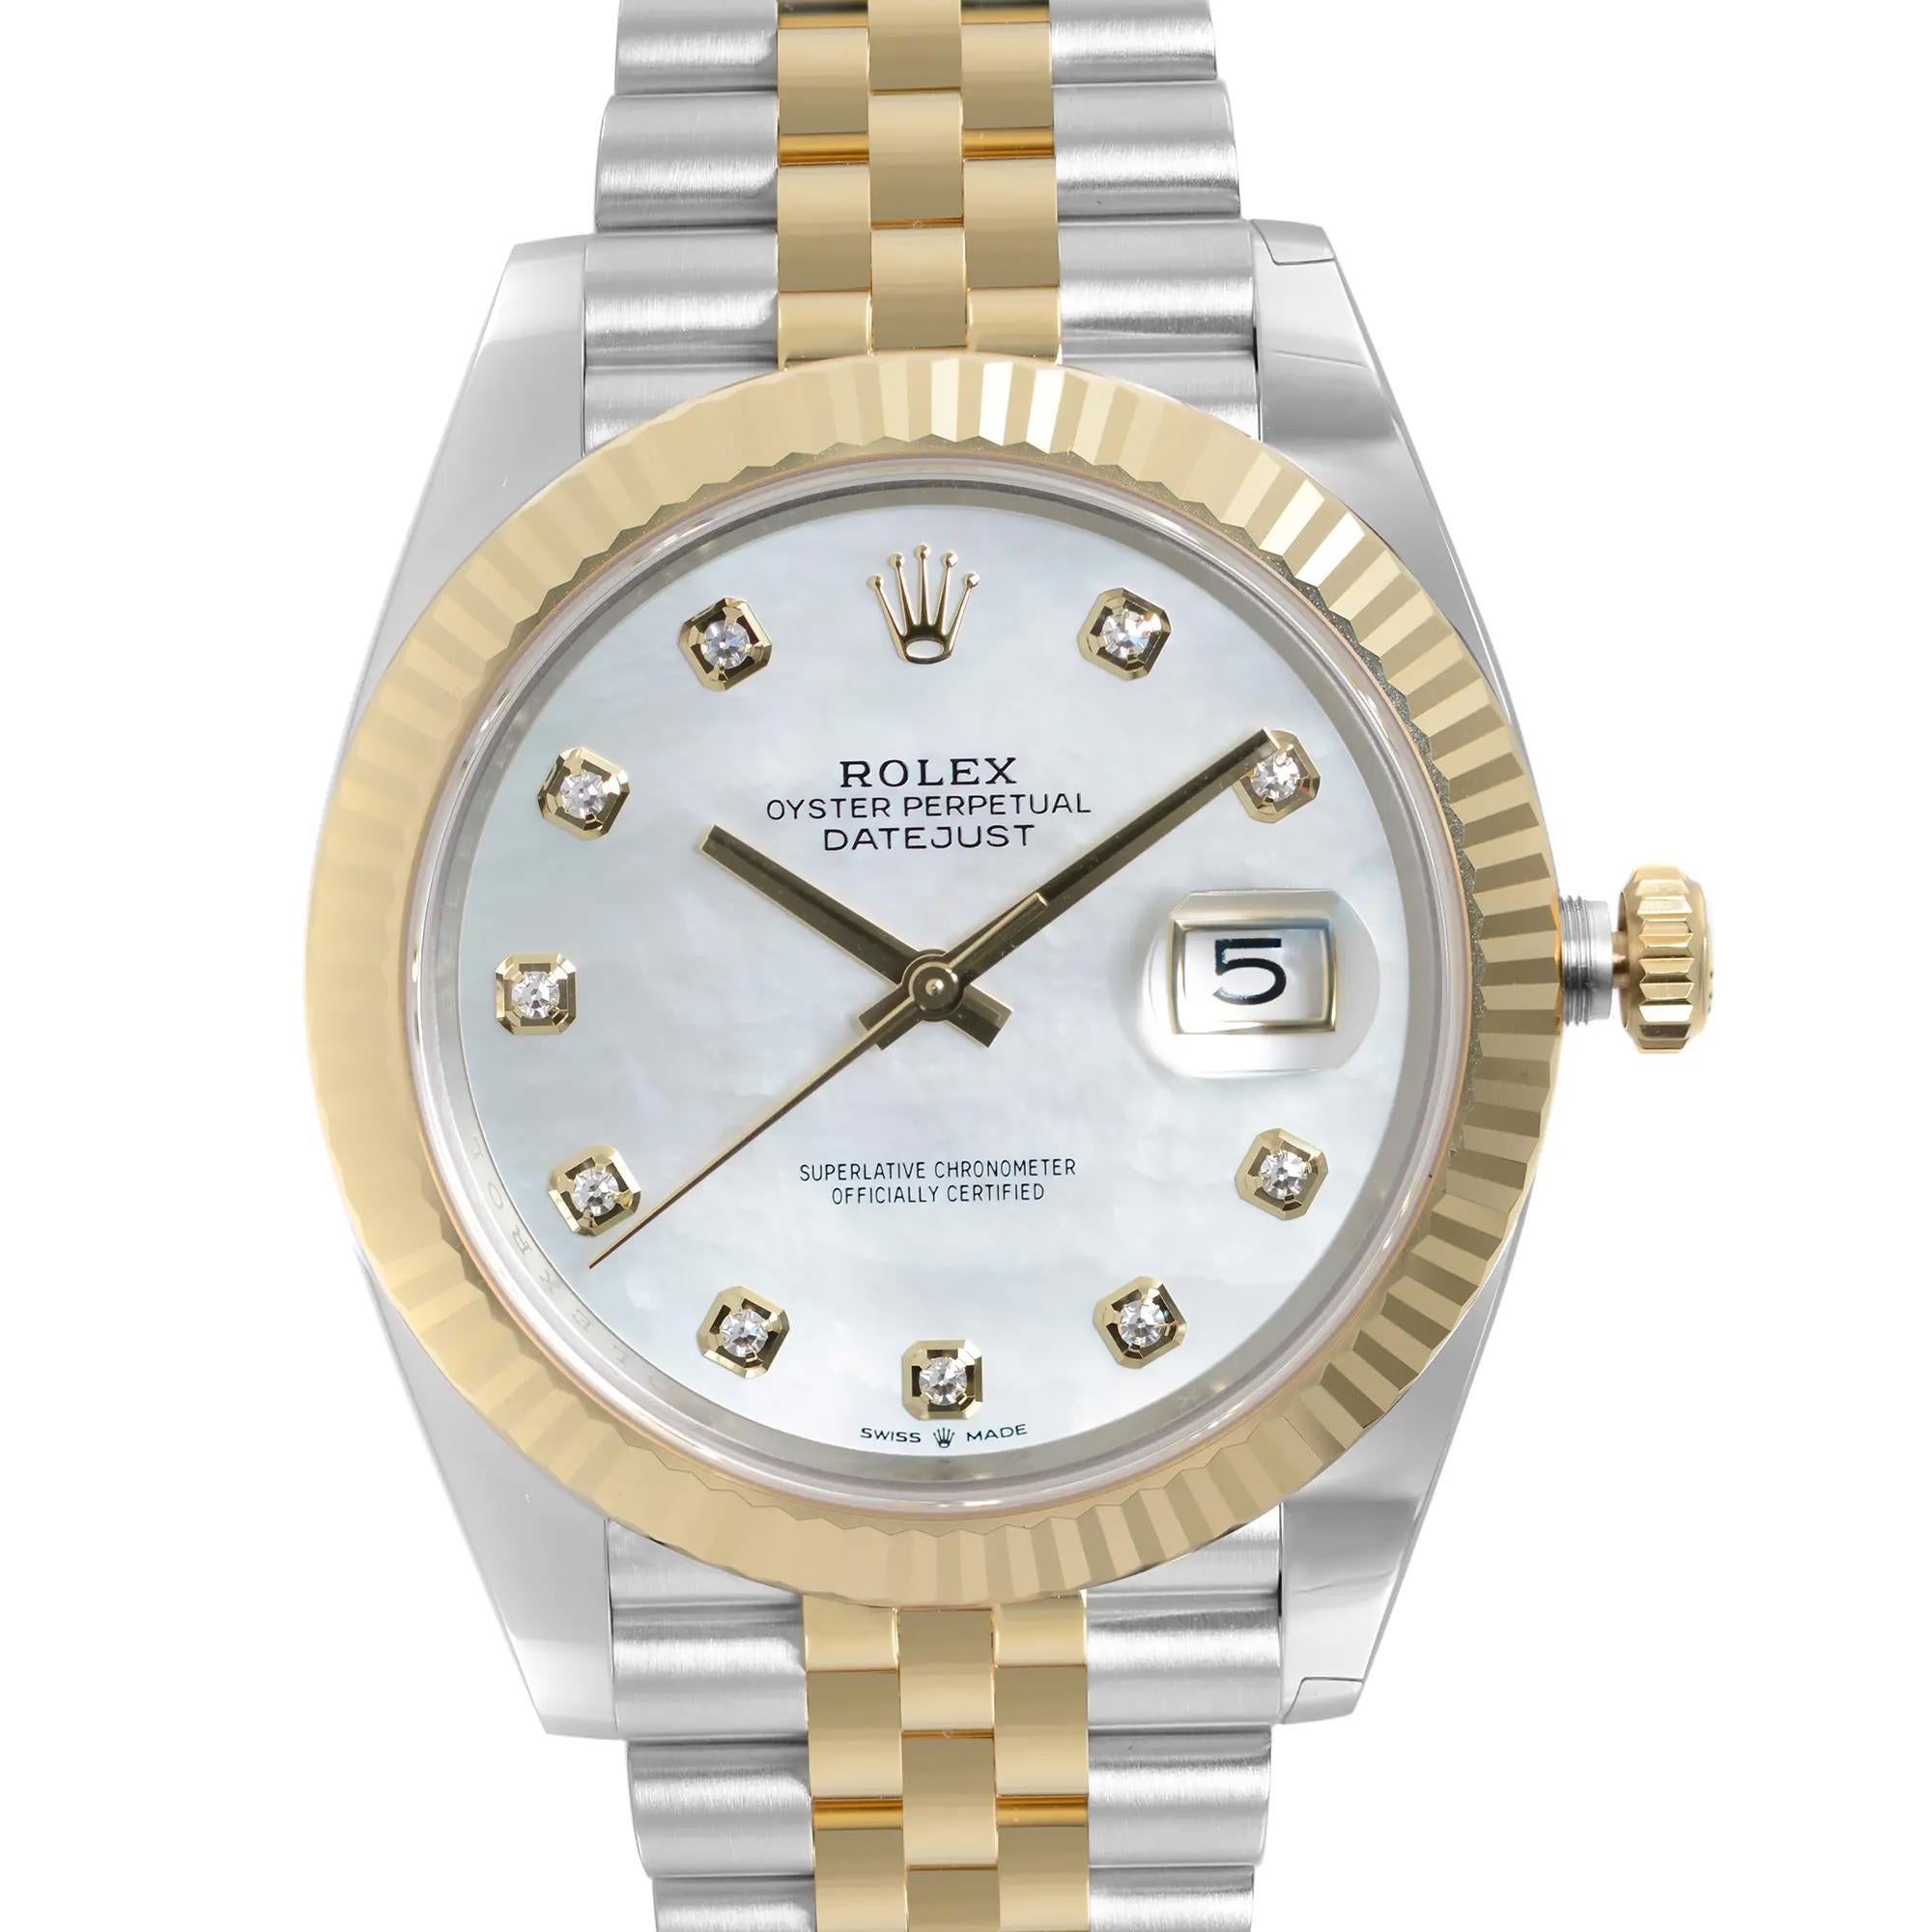 Unworn. Full link bracelet, clean dial. Comes with an original box and papers.

General Information
Brand: Rolex
Model Name: Rolex Datejust
Model Number: 126333
Department: Men
Country/Region of Manufacture: Switzerland
Year Manufactured: